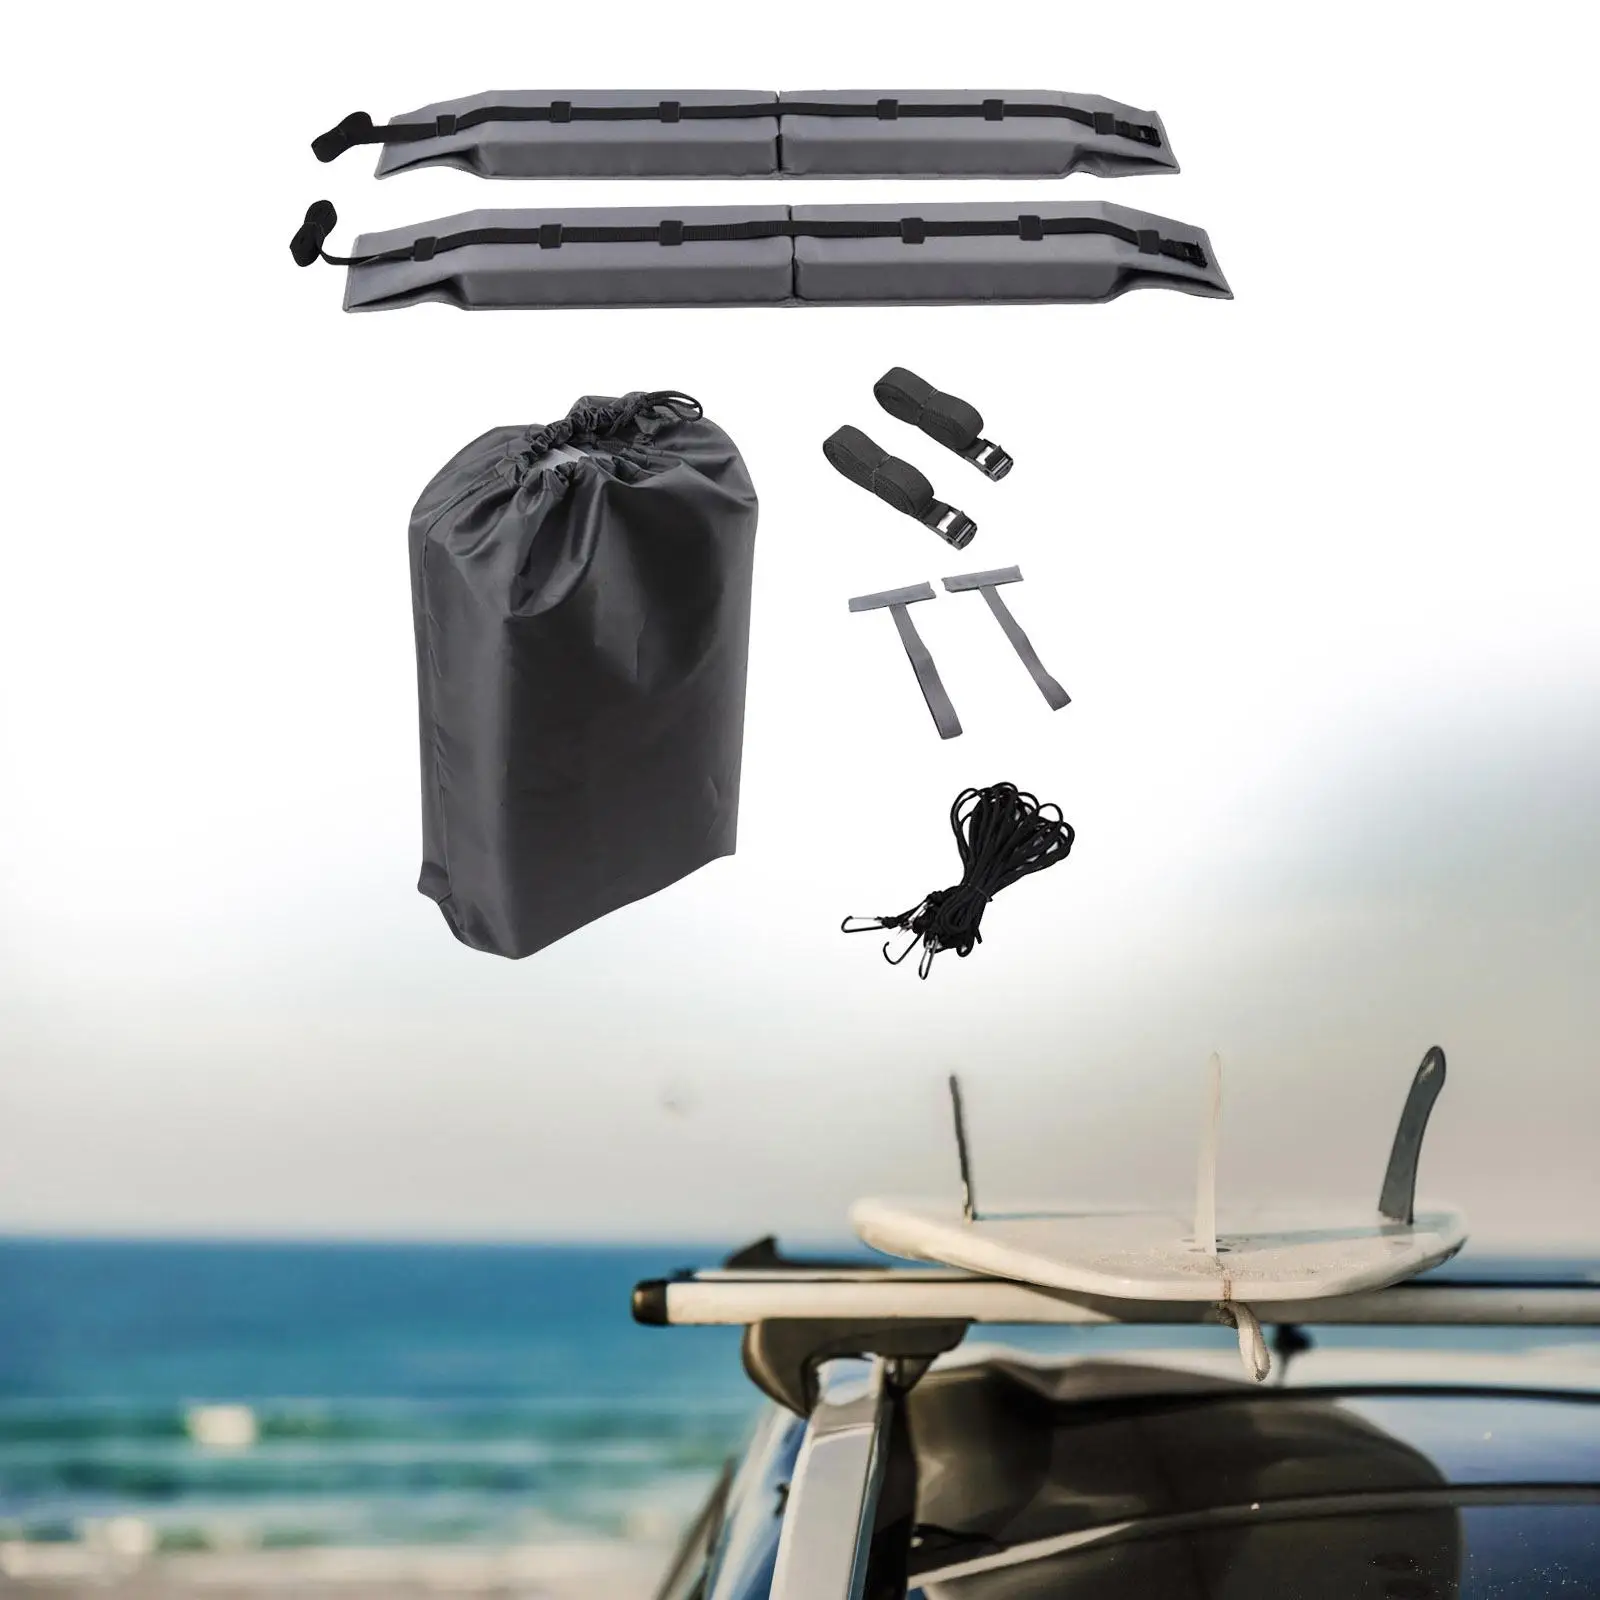 Universal Soft Roof Rack Pads Luggage Carrier System for Kayak Surfboard SUP Canoe Snowboard Travel Accessories Foldable Durable